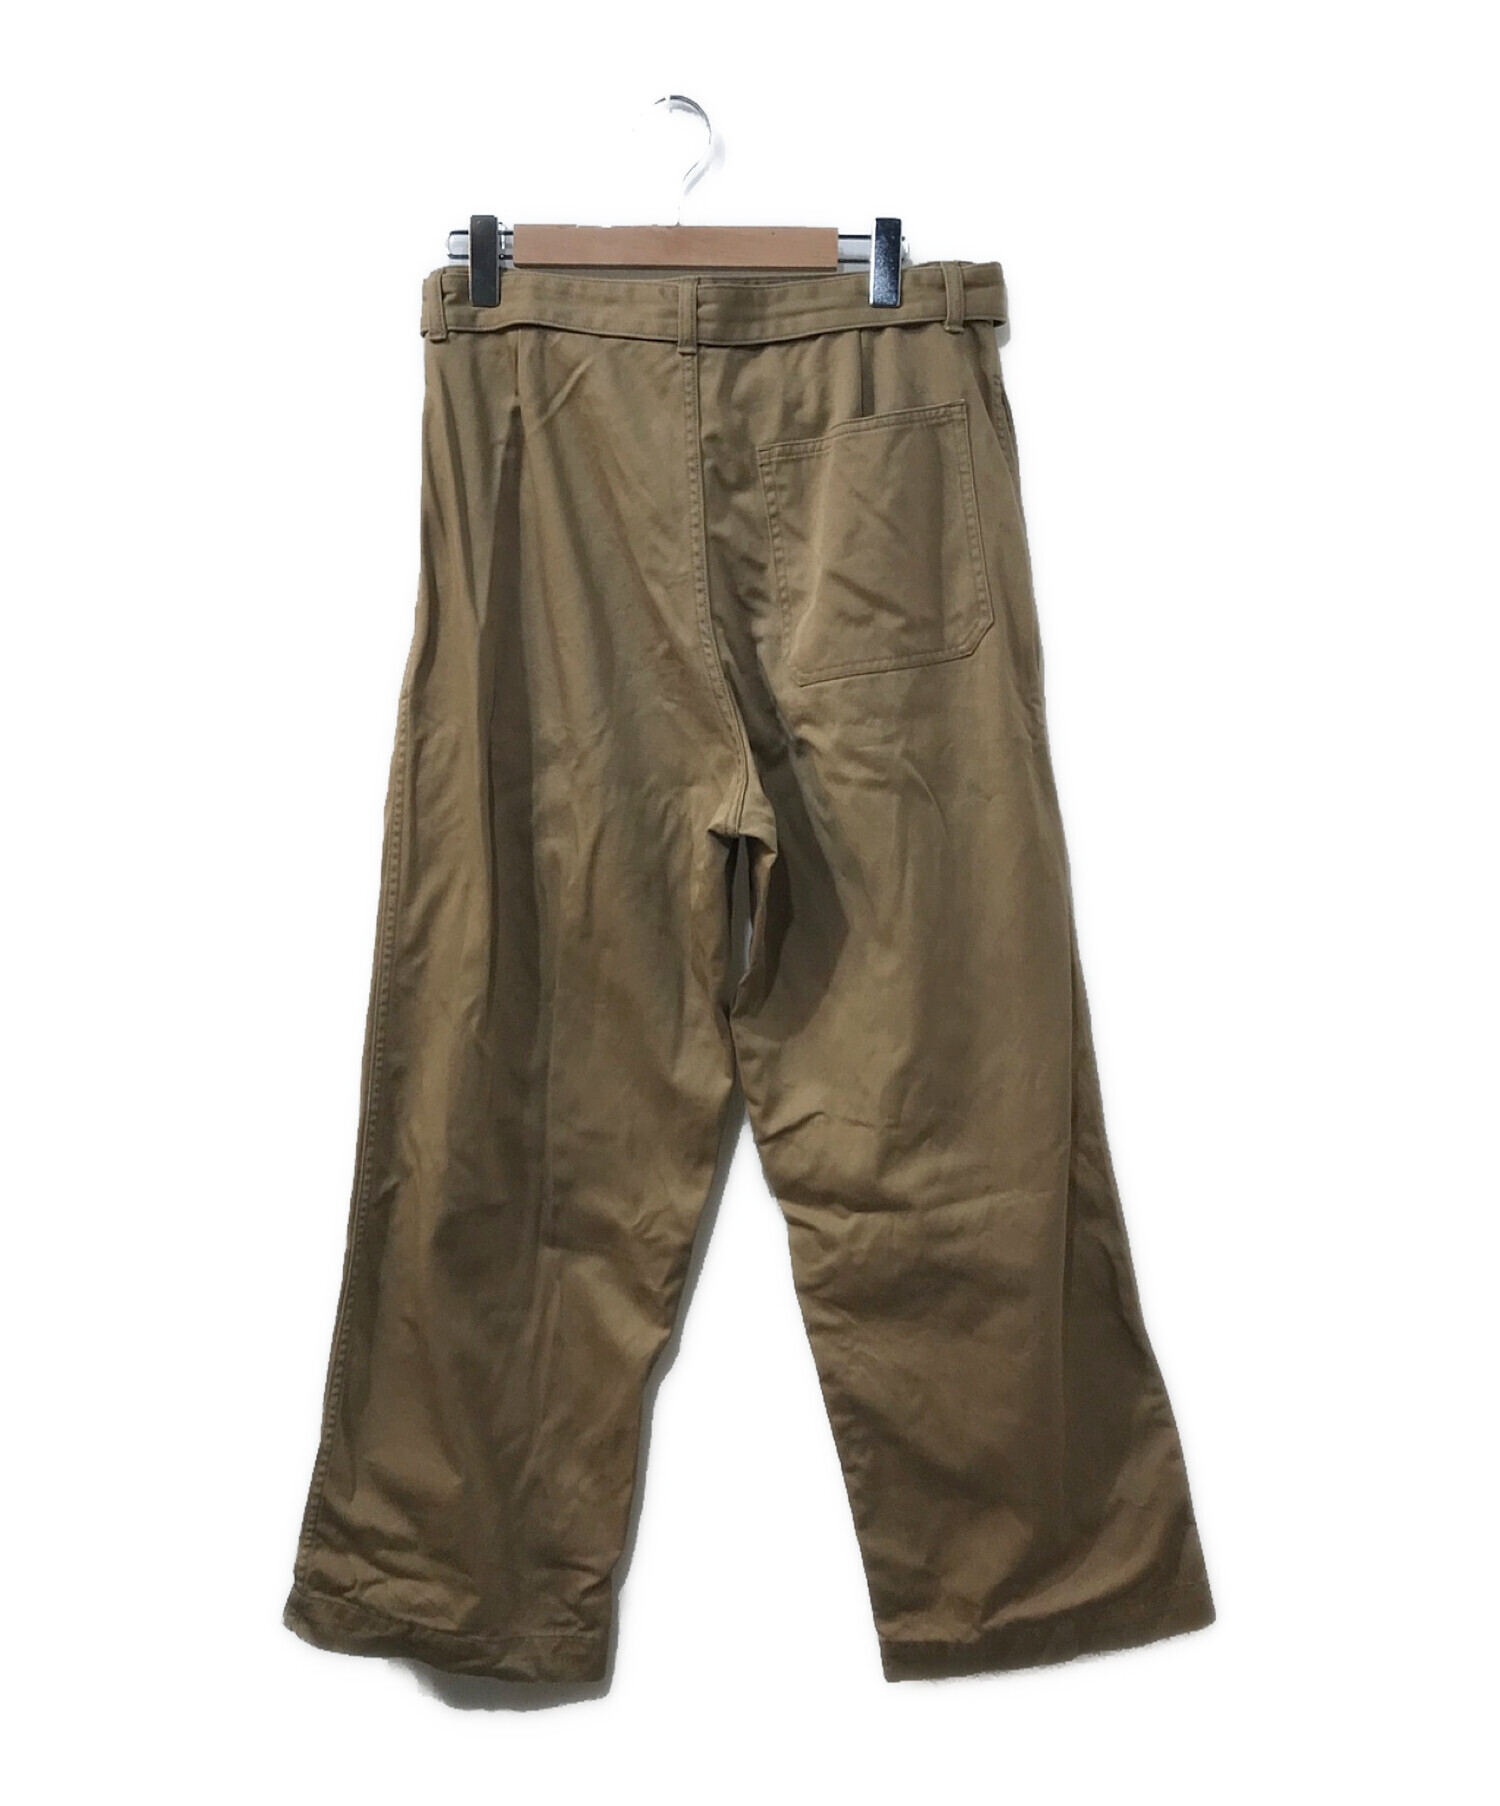 Graphpaper Chino Belted Pants size:2